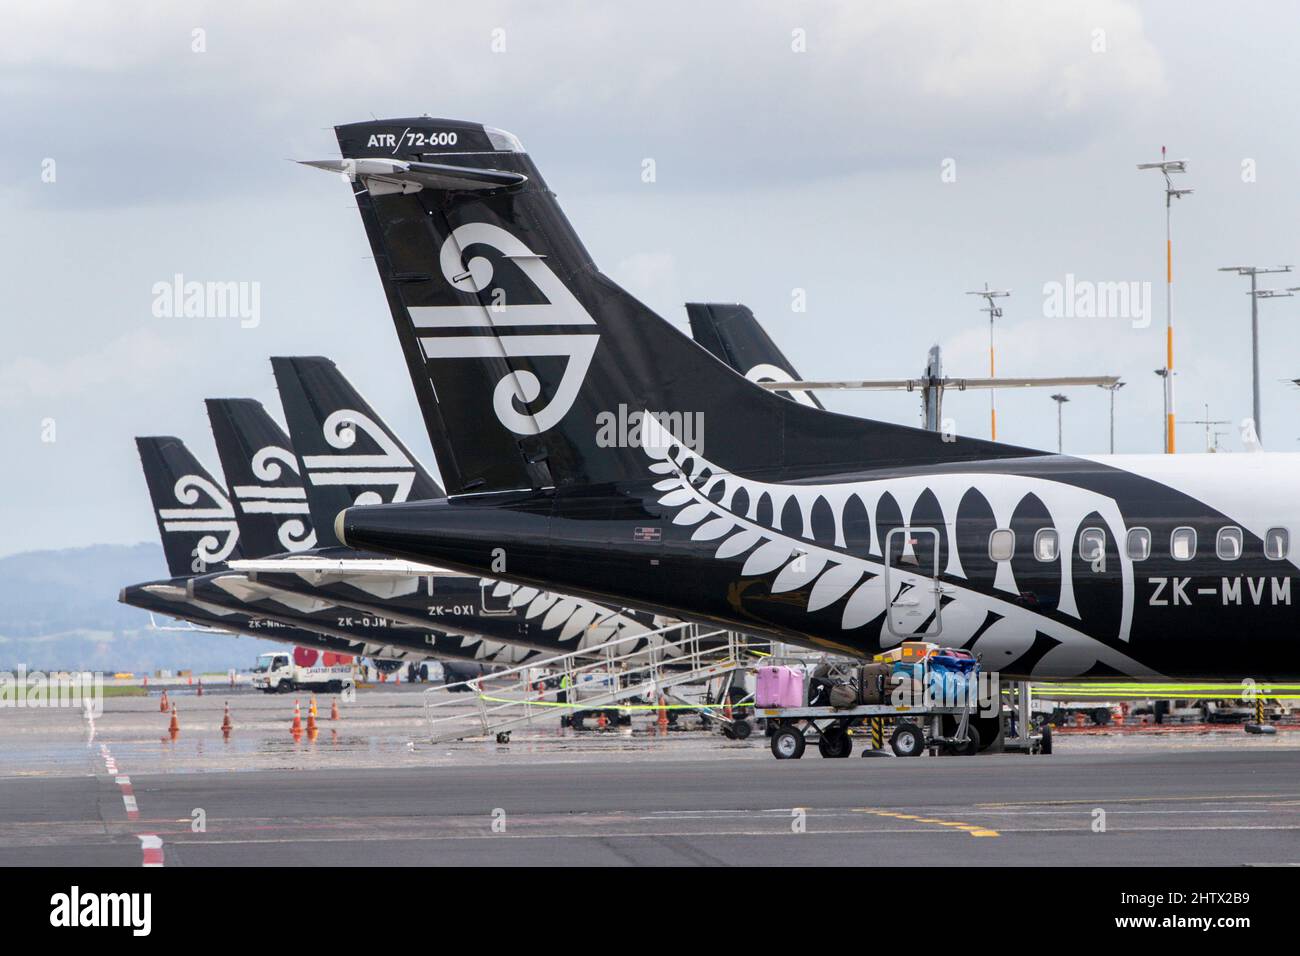 Air New Zealand aircraft at Auckland Airport, New Zealand on Monday, February 28, 2022. Stock Photo